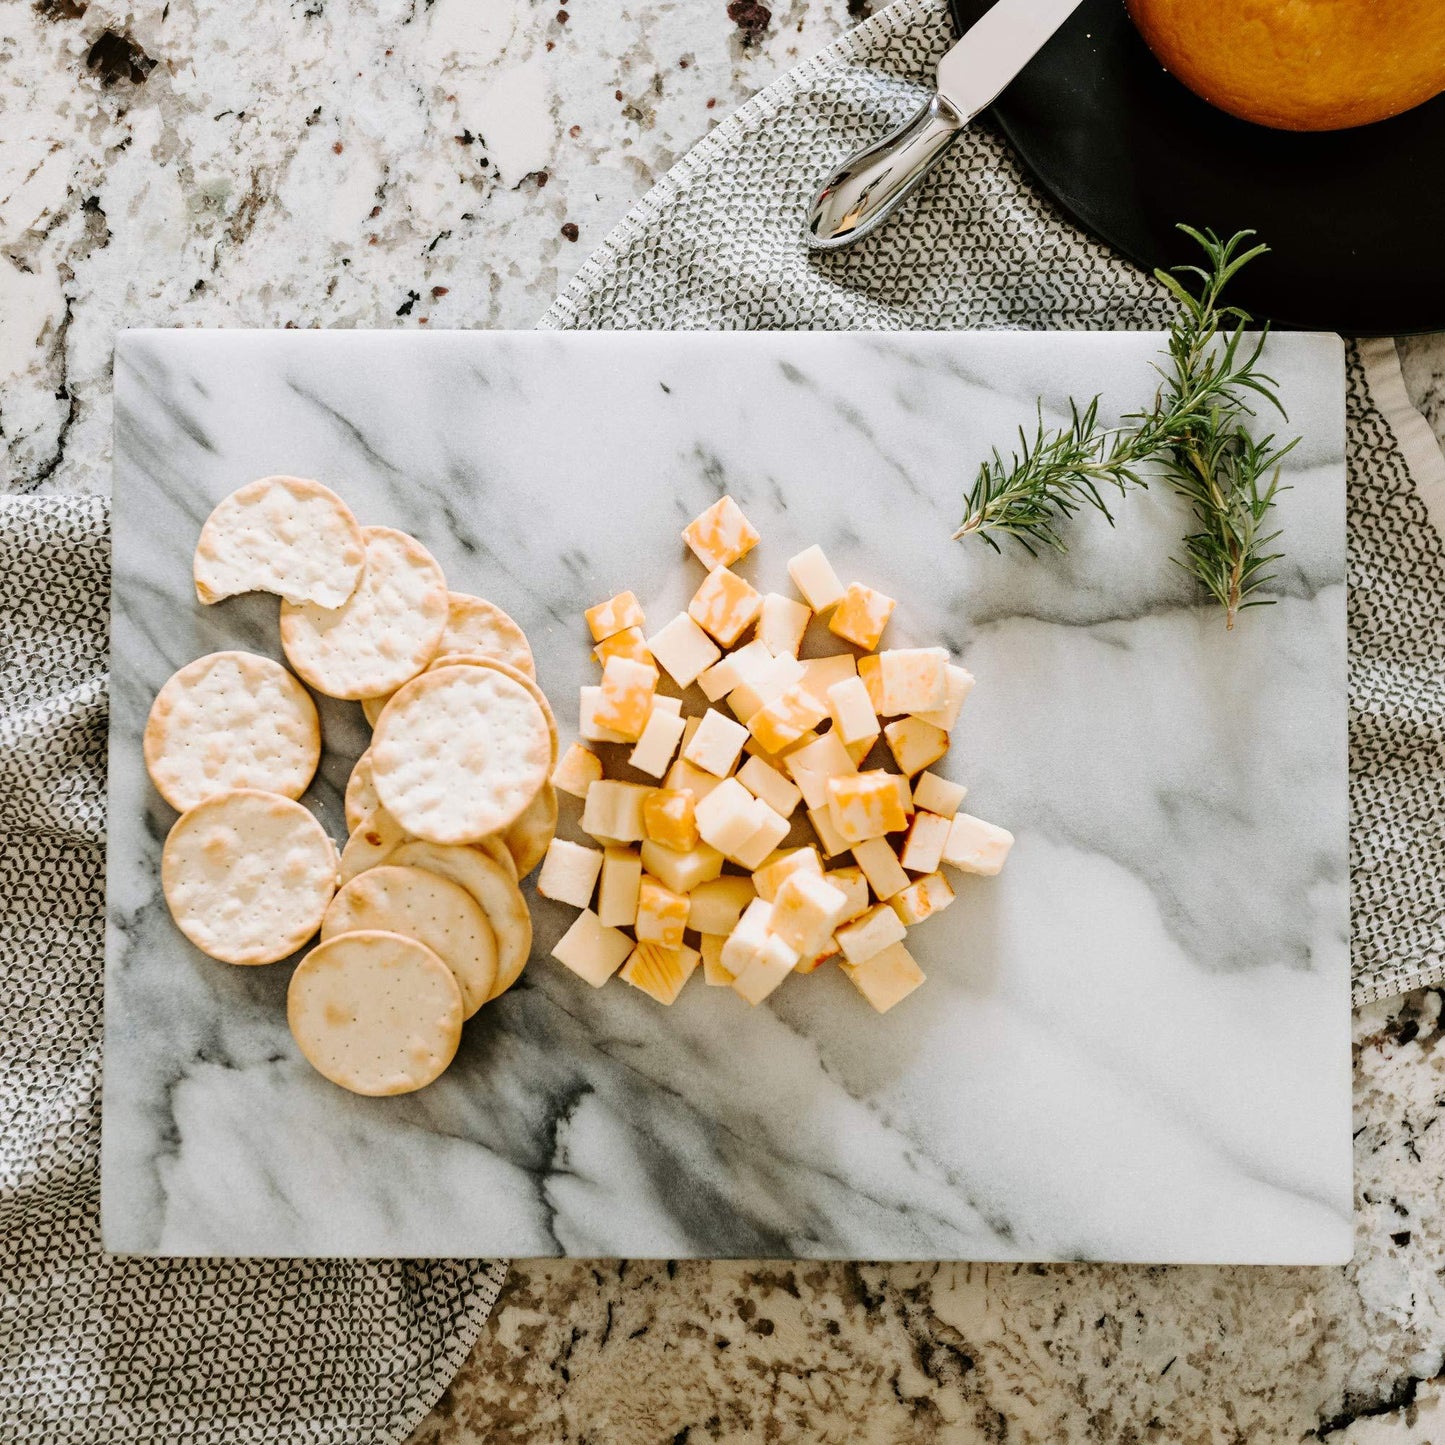 Villa Acacia Marble Cutting Board - 16 x 12 Inch Marble Slab Pastry Board for Charcuterie, Cheese, Dough, Dessert - Decorative Stone Cutting Board for Kitchen and Home﻿ - CookCave